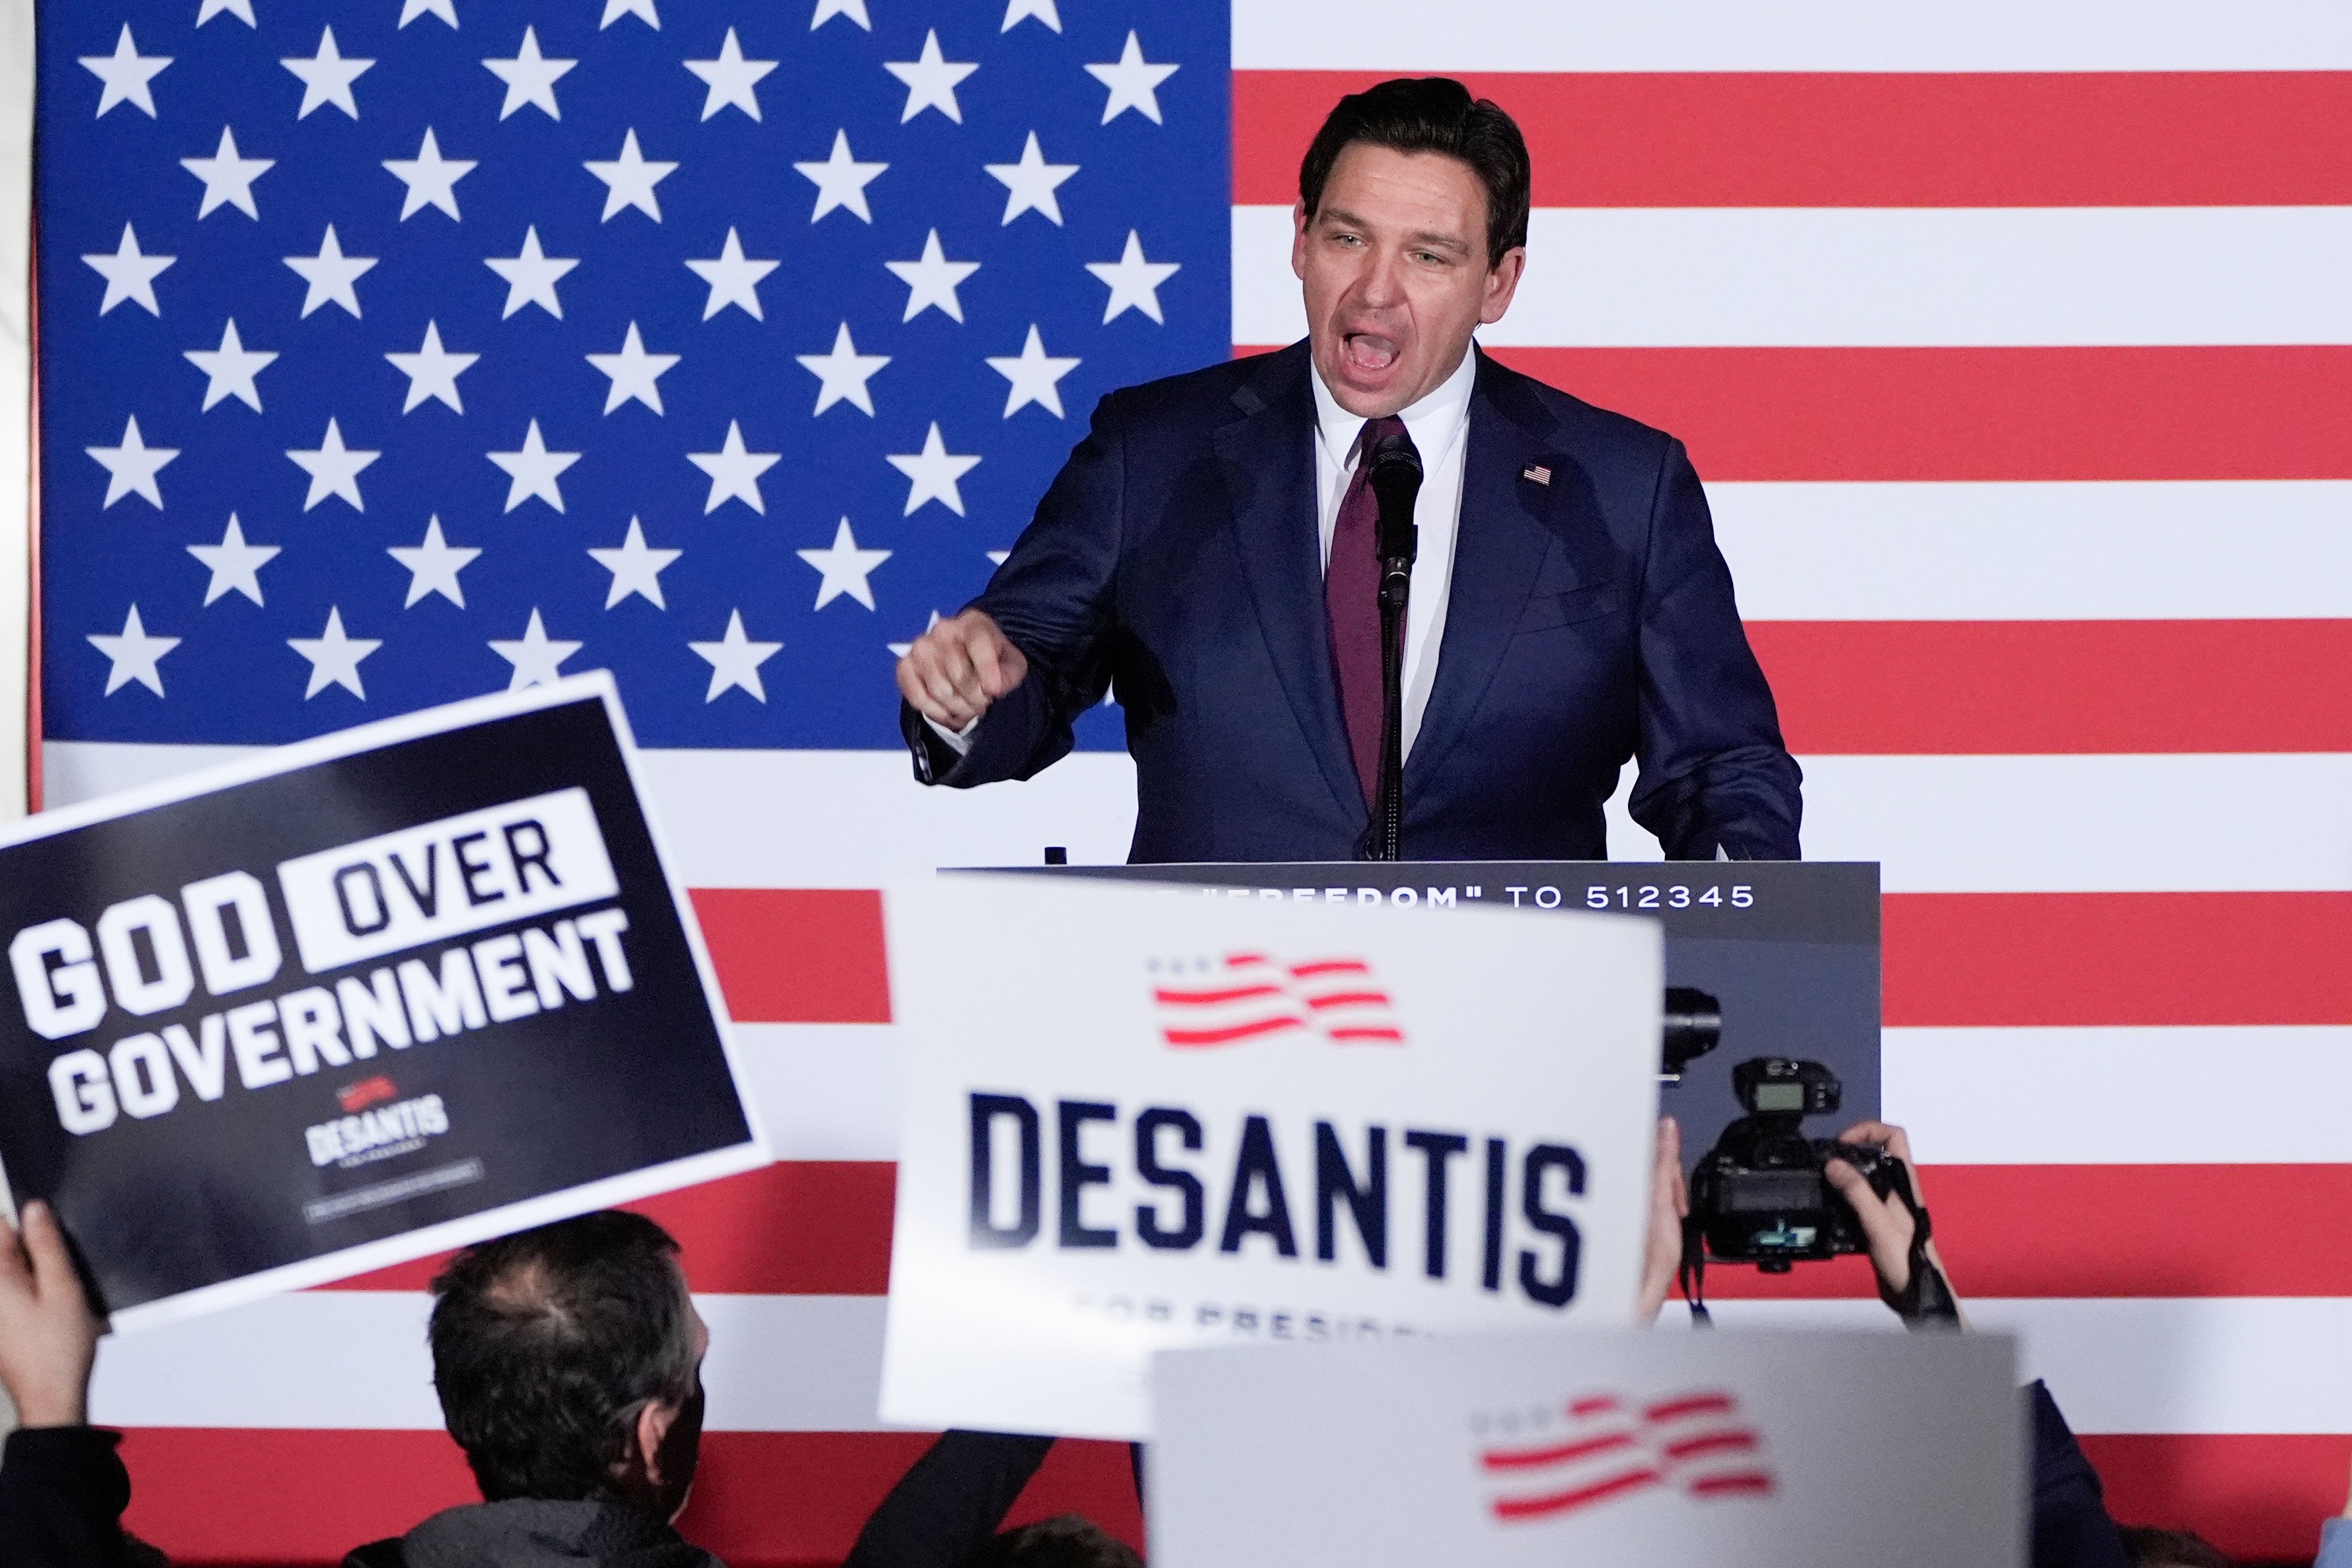 Ron DeSantis speaks to supporters in Iowa on 15 January.